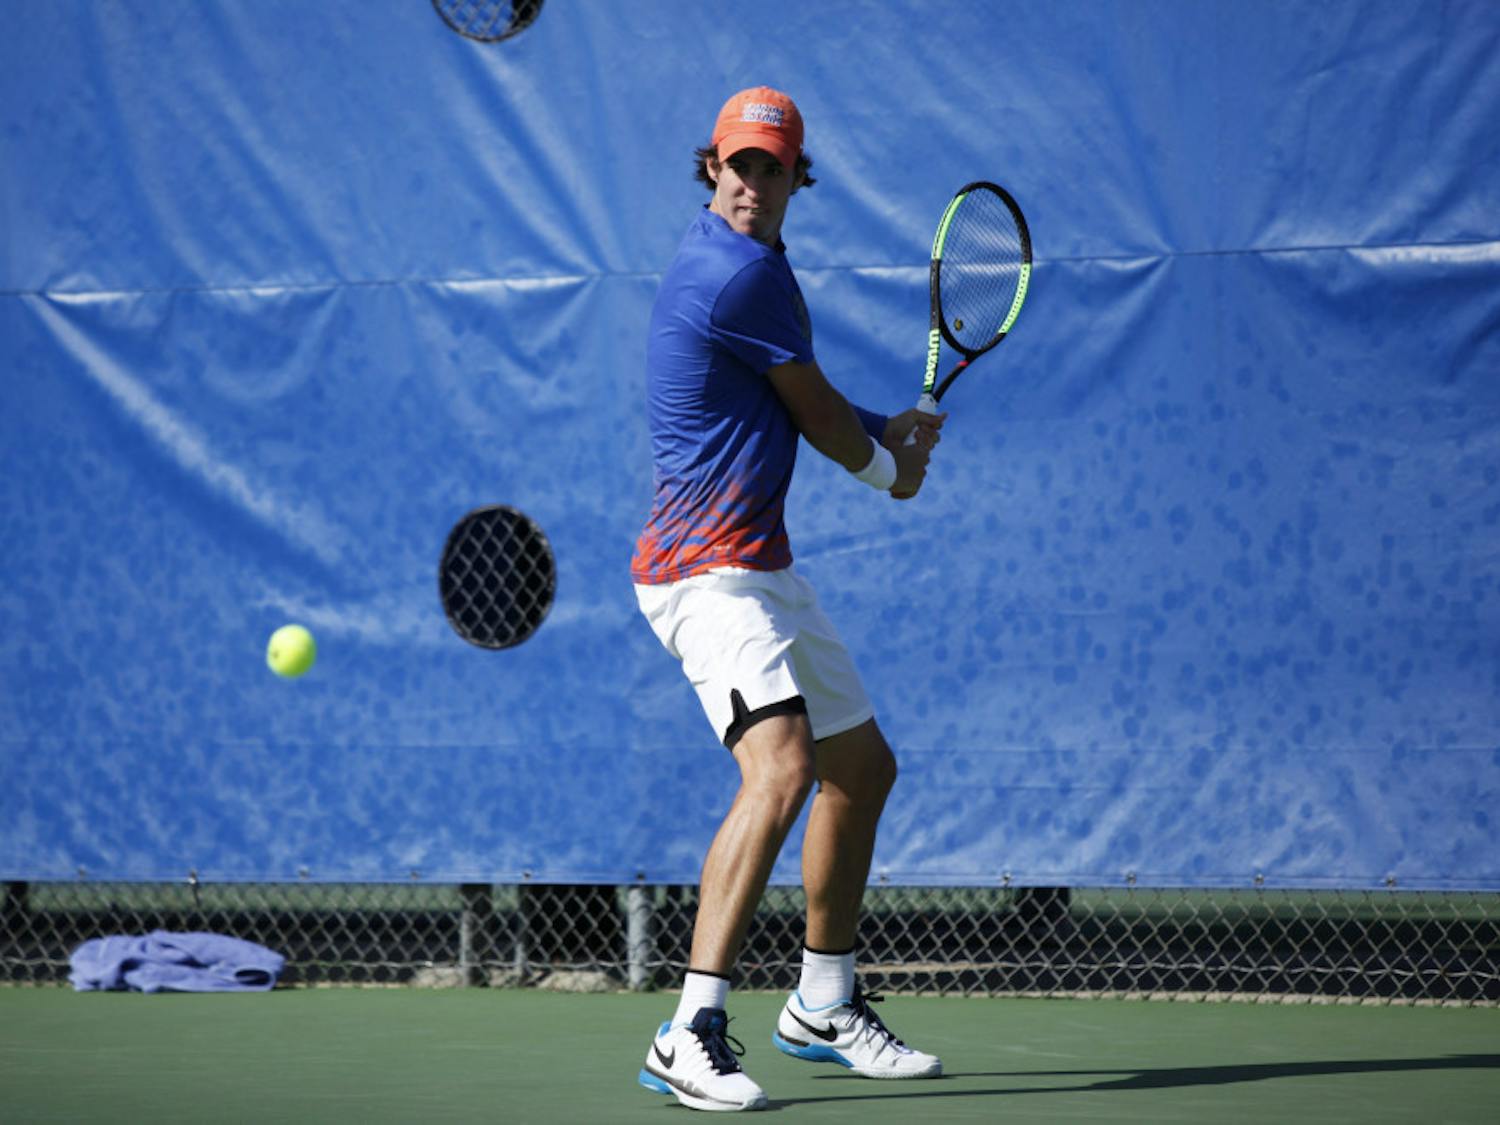 Florida men's tennis player Alfredo Perez emigrated from his hometown of Artemisa, Cuba, to live in Miami when he was 10-years-old.  